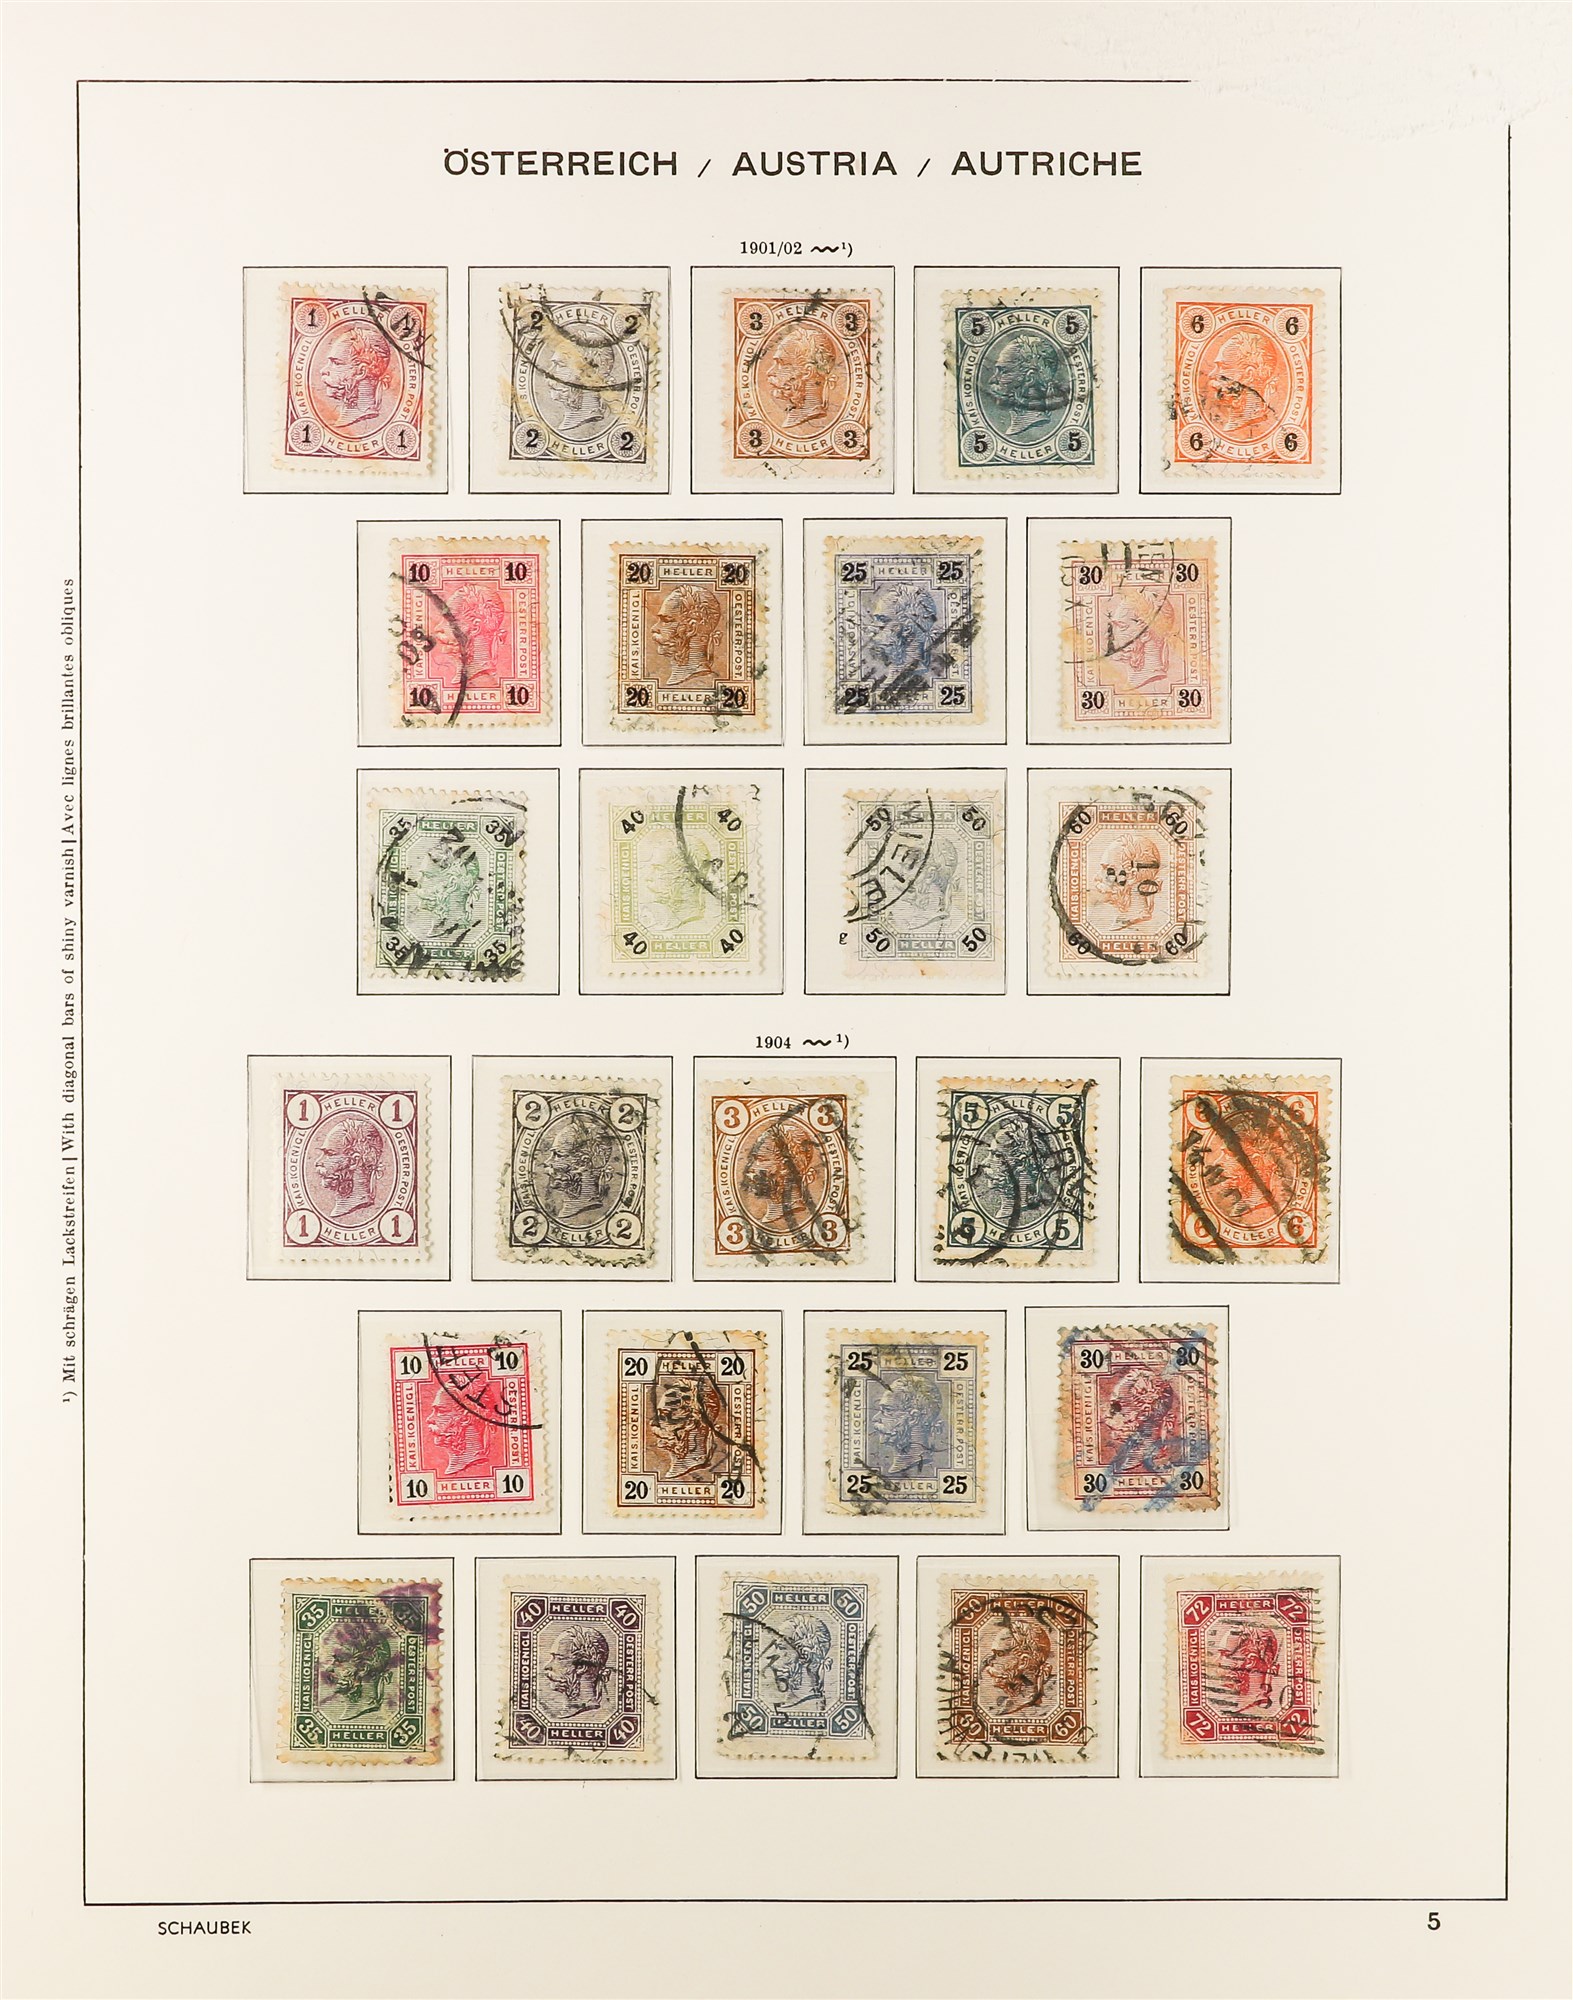 AUSTRIA 1850 - 1937 COLLECTION. of around 1000 mint & used stamps in Schaubek Austria hingeless - Image 9 of 29